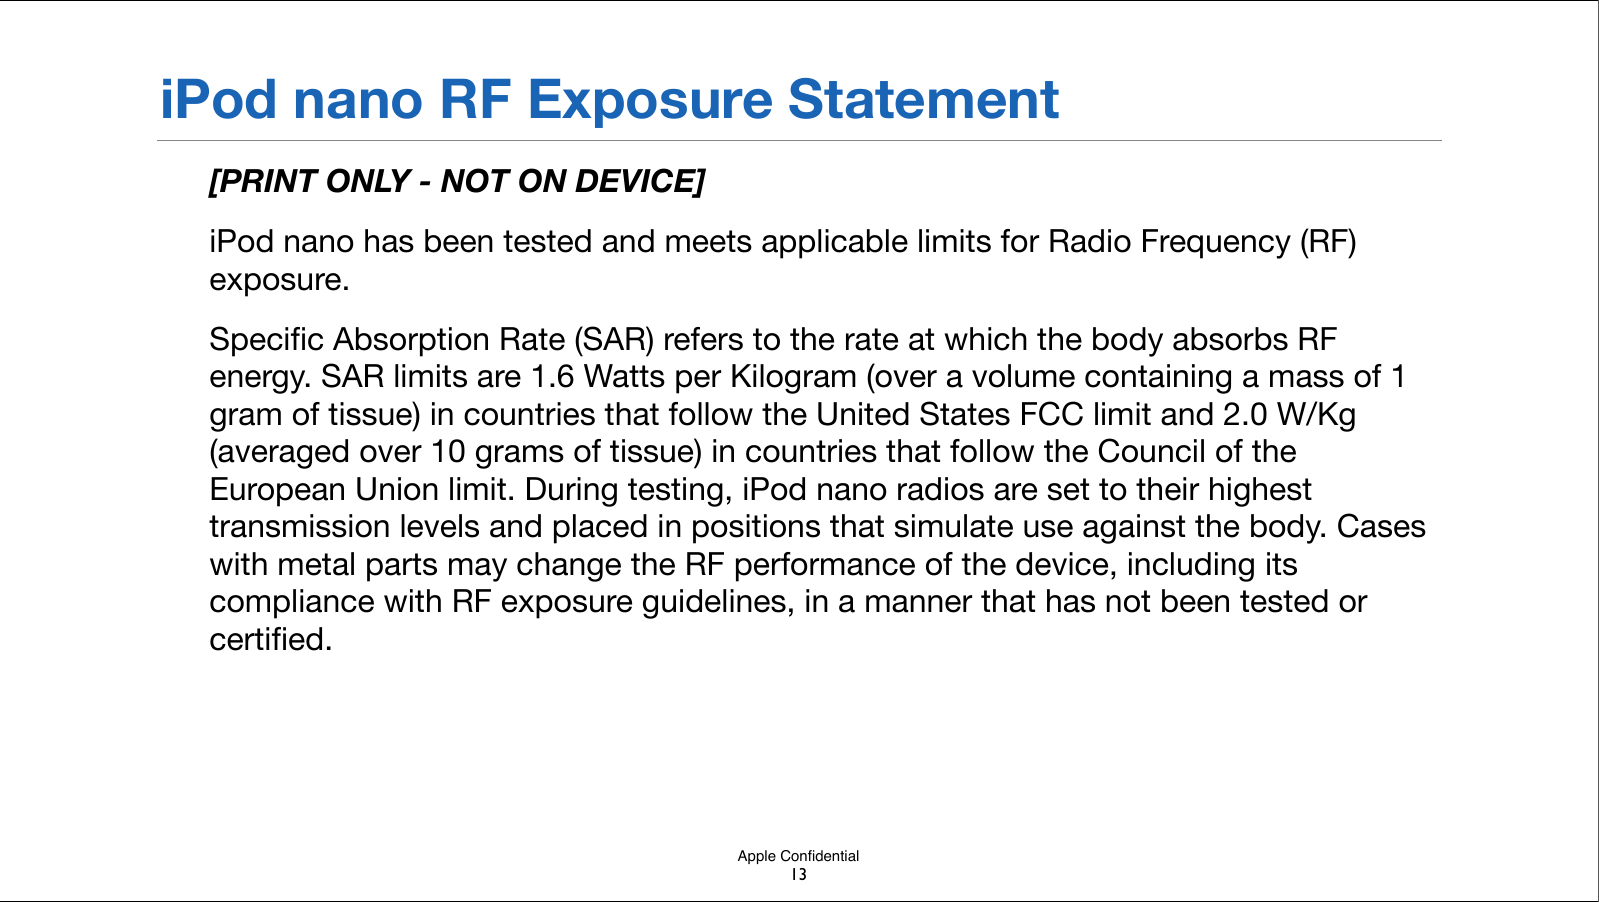 Apple ConﬁdentialiPod nano RF Exposure Statement[PRINT ONLY - NOT ON DEVICE]iPod nano has been tested and meets applicable limits for Radio Frequency (RF) exposure.Speciﬁc Absorption Rate (SAR) refers to the rate at which the body absorbs RF energy. SAR limits are 1.6 Watts per Kilogram (over a volume containing a mass of 1 gram of tissue) in countries that follow the United States FCC limit and 2.0 W/Kg (averaged over 10 grams of tissue) in countries that follow the Council of the European Union limit. During testing, iPod nano radios are set to their highest transmission levels and placed in positions that simulate use against the body. Cases with metal parts may change the RF performance of the device, including its compliance with RF exposure guidelines, in a manner that has not been!tested or certiﬁed.13